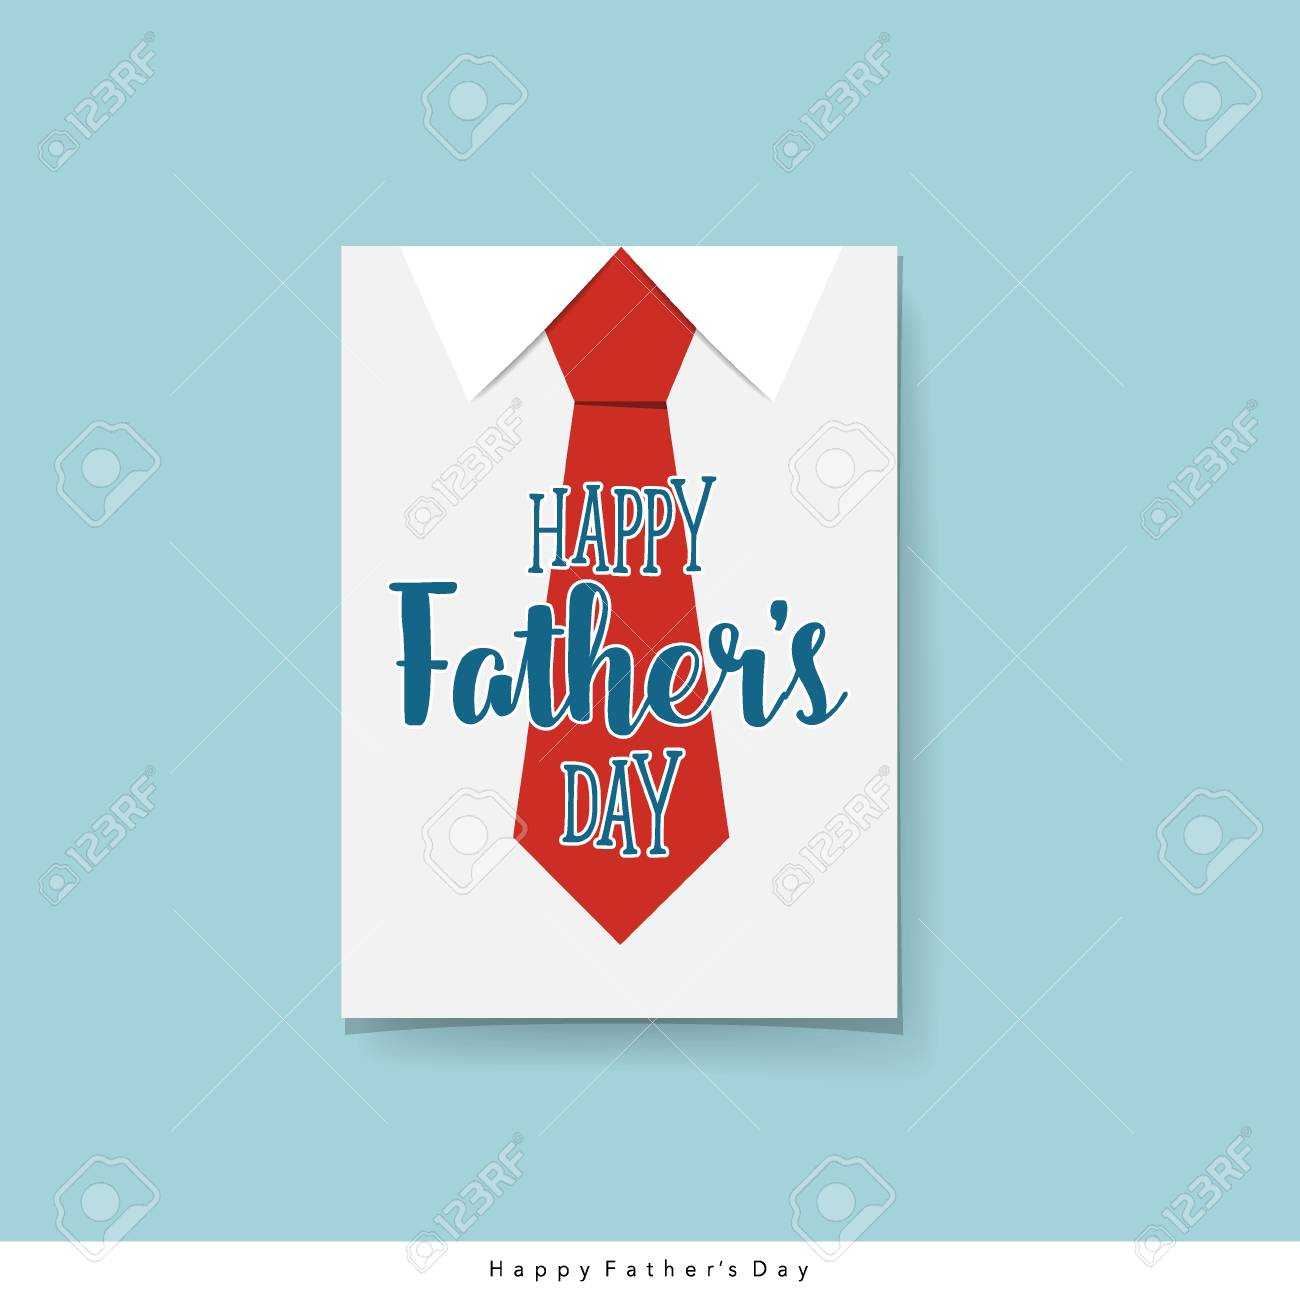 Happy Fathers Day Card Design With Big Tie. Vector Illustration. Regarding Fathers Day Card Template